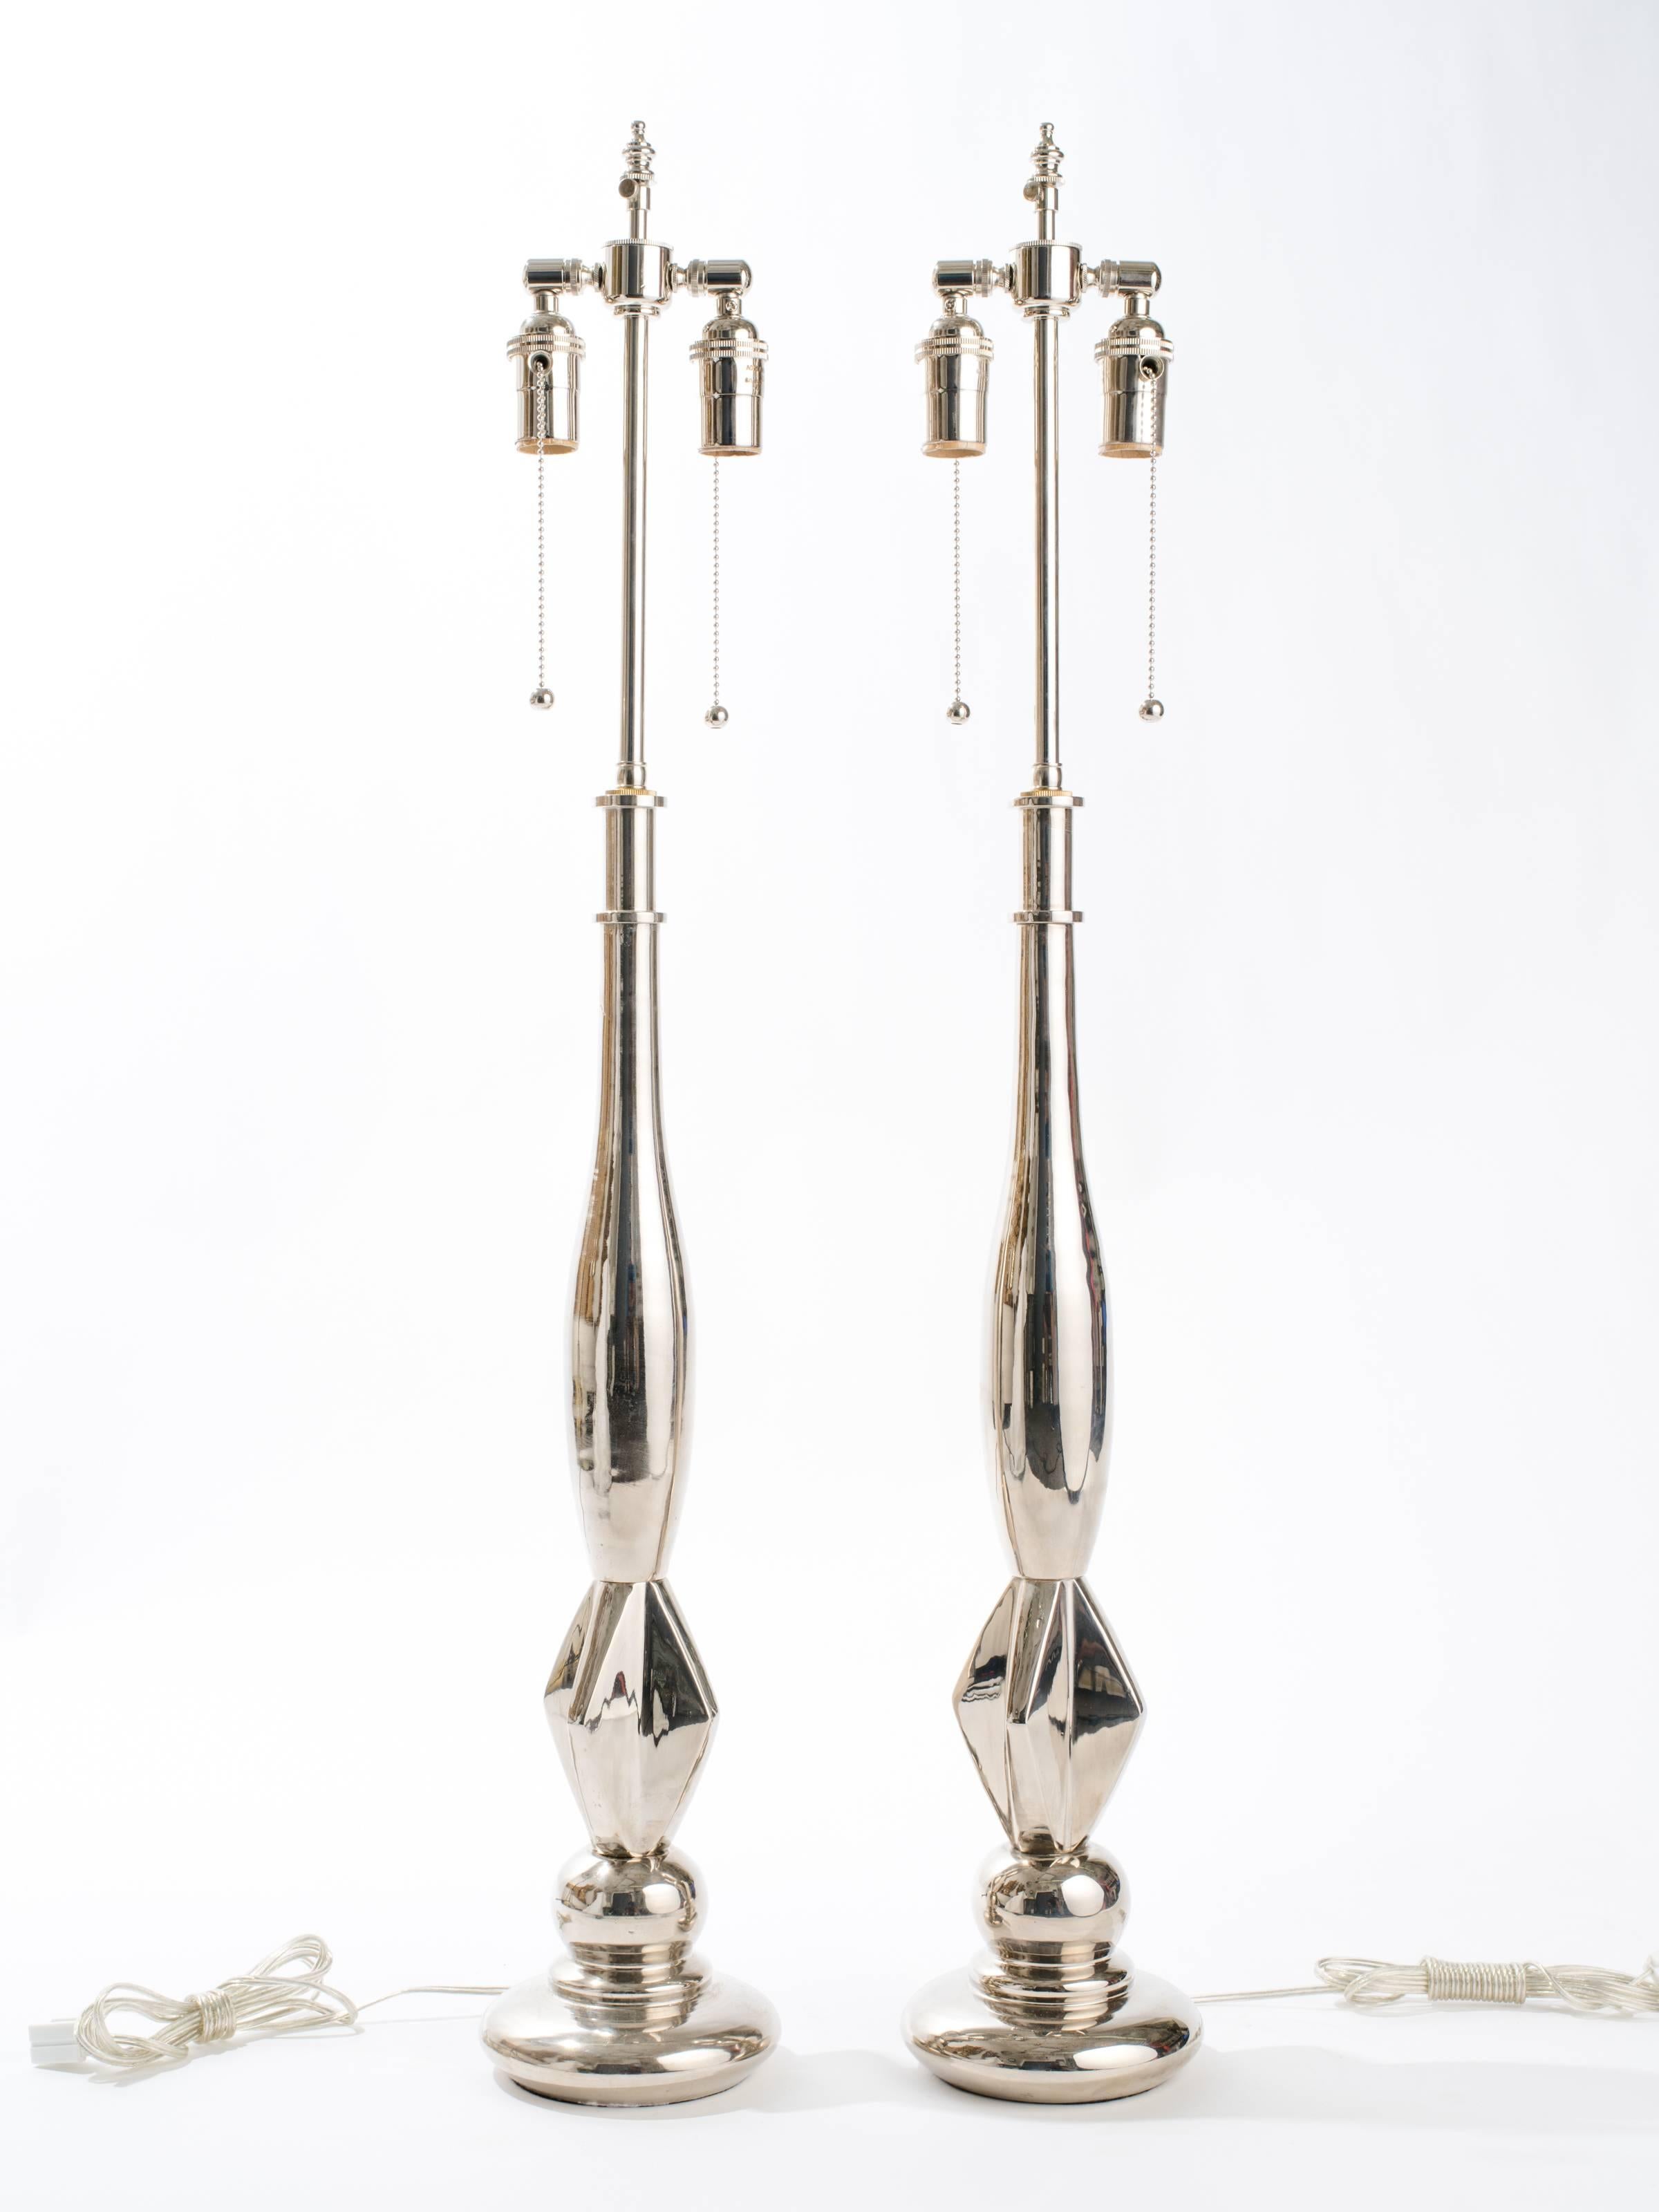 Elegant pair of nickel-plated metal lamps. Rewired with double pull chain sockets and adjustable height cluster.